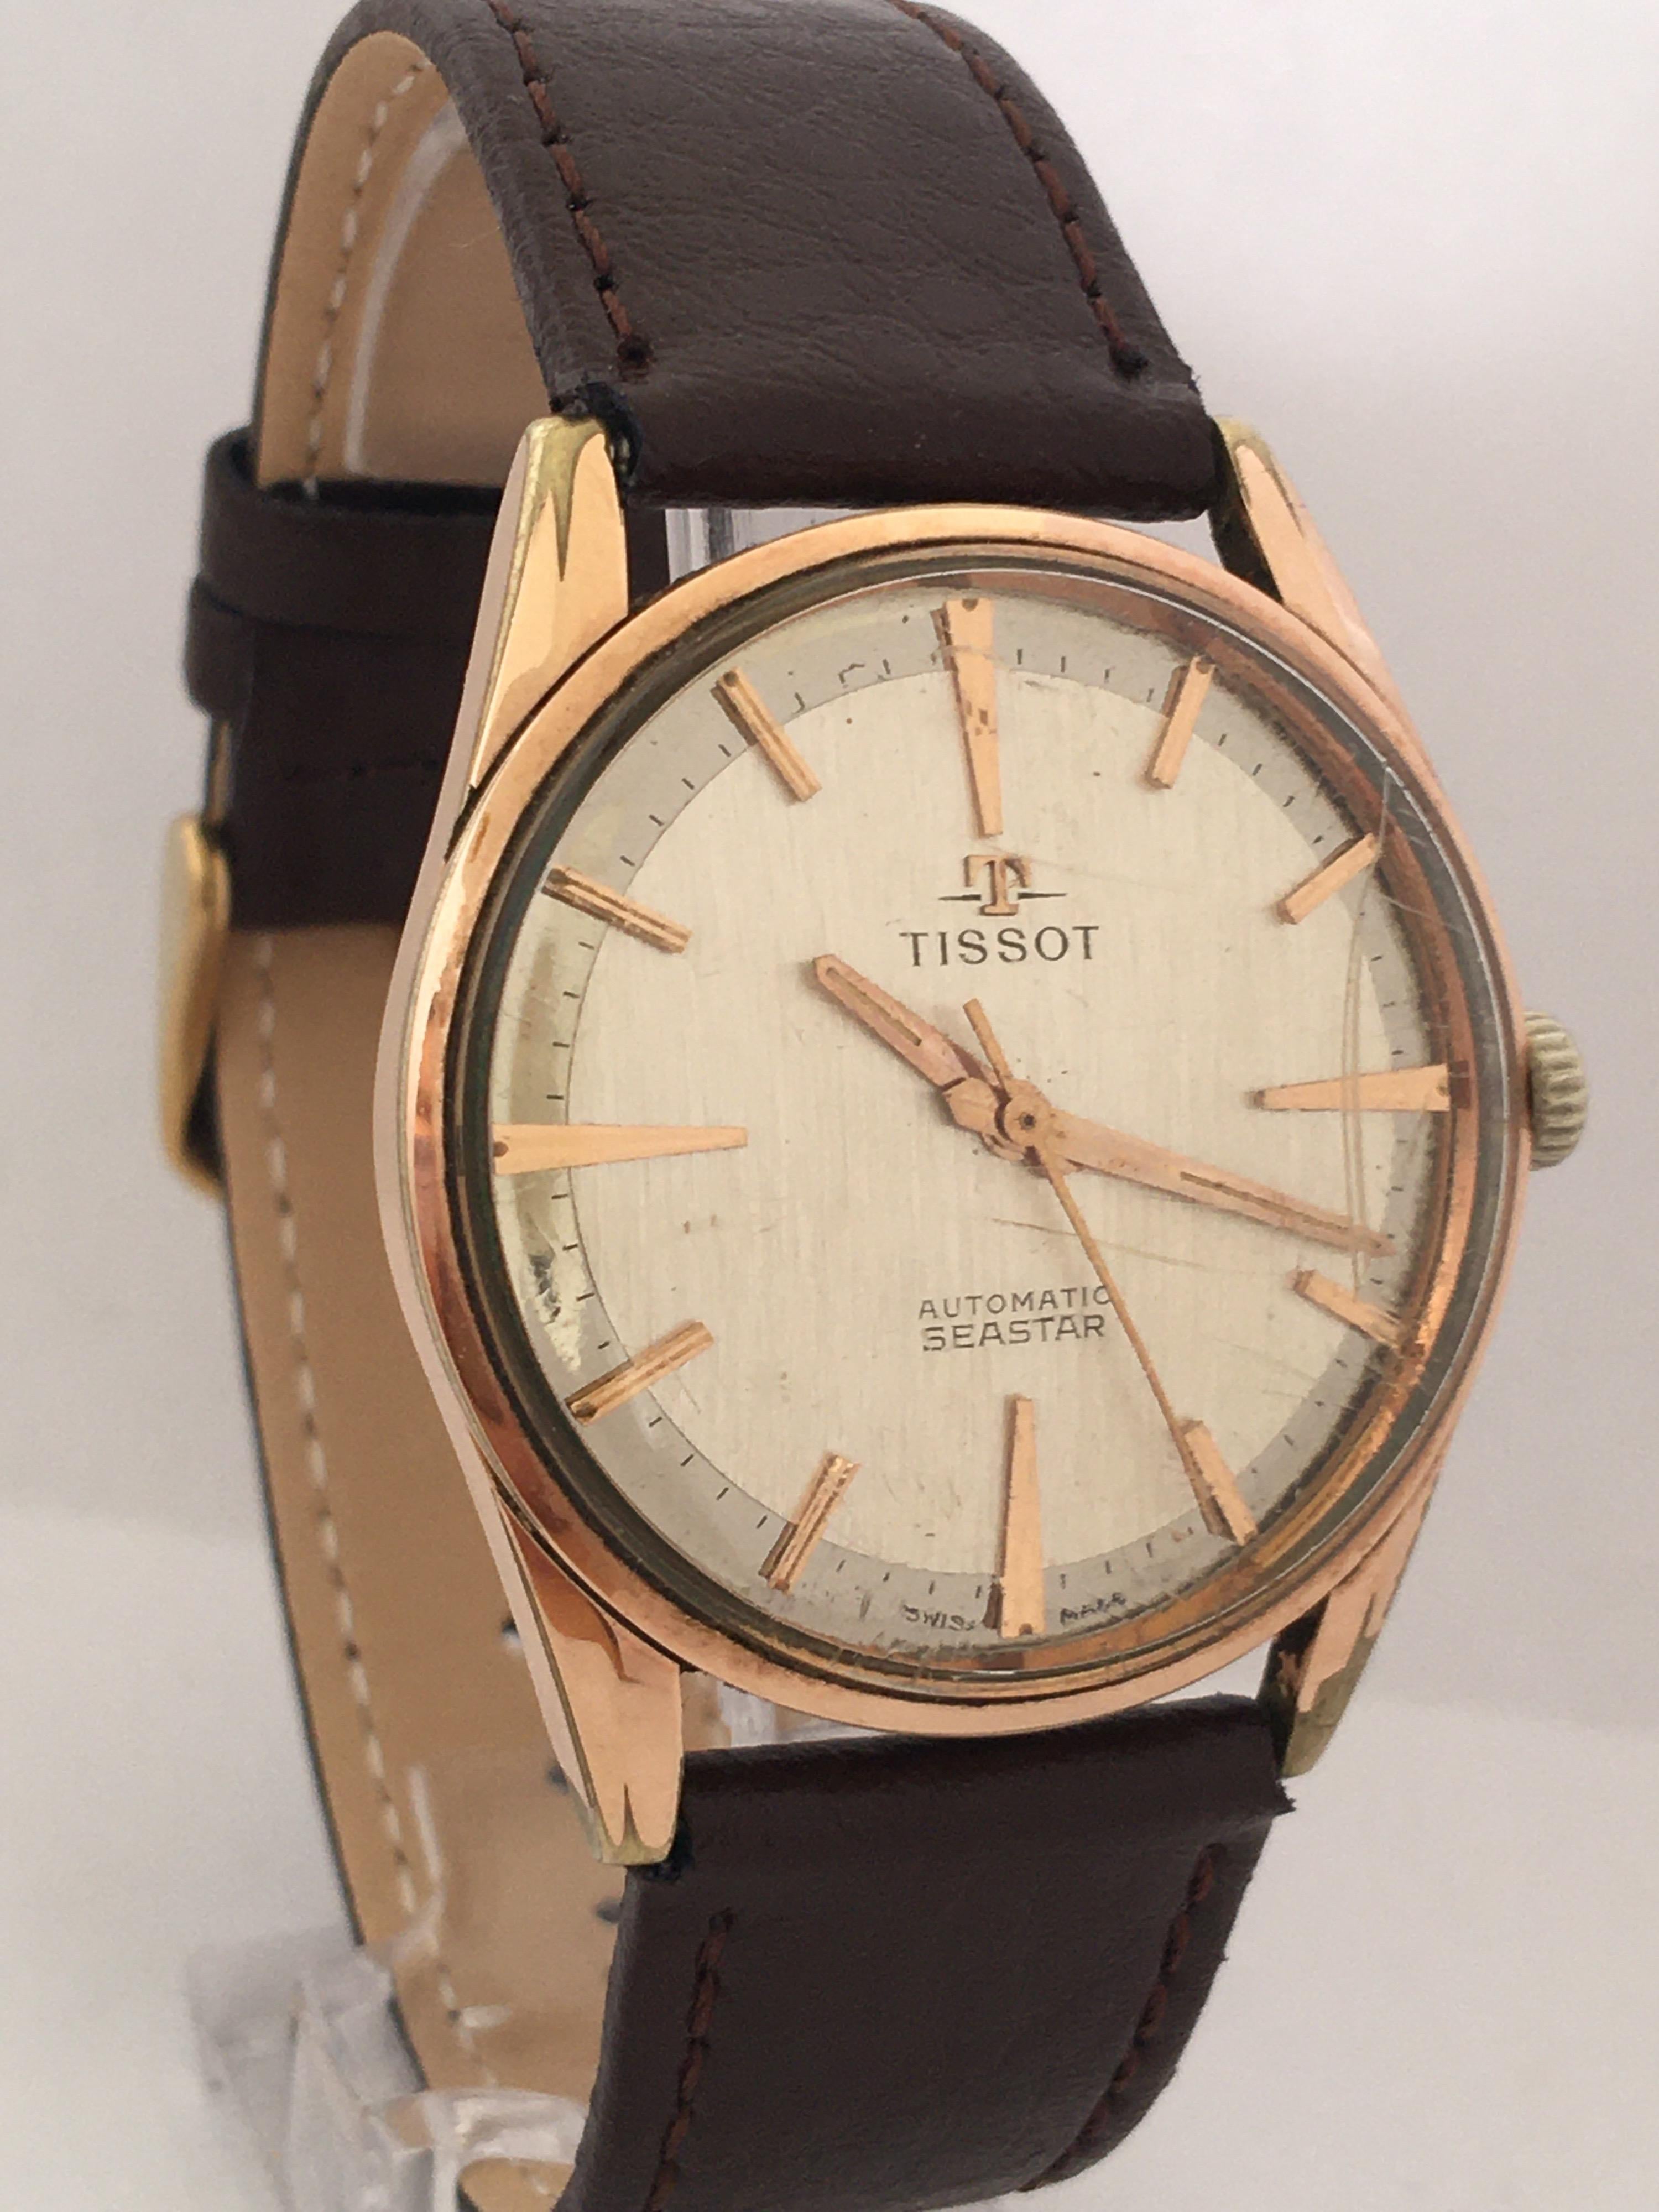 1960s TISSOT Automatic Seastar Gold-Plated Vintage Watch For Sale 6